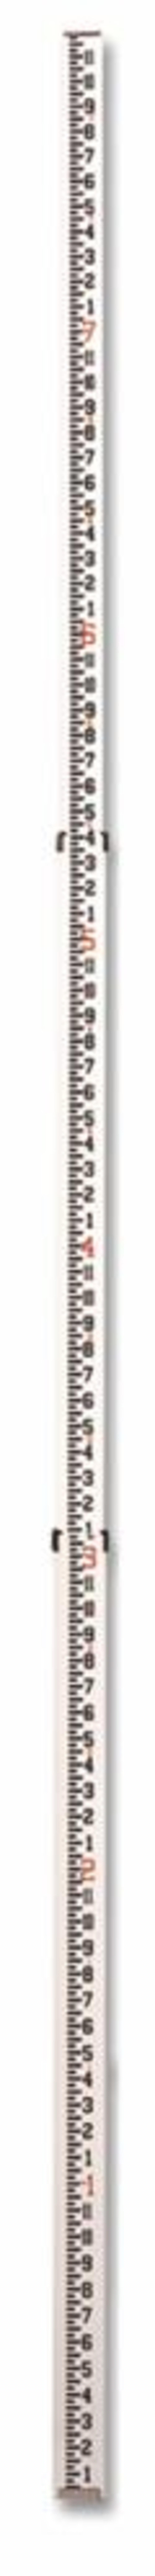 CST Berger 8 Ft. Aluminum Telescoping Rod 3-Section Inches / 8ths 06-808C -  Acme Tools